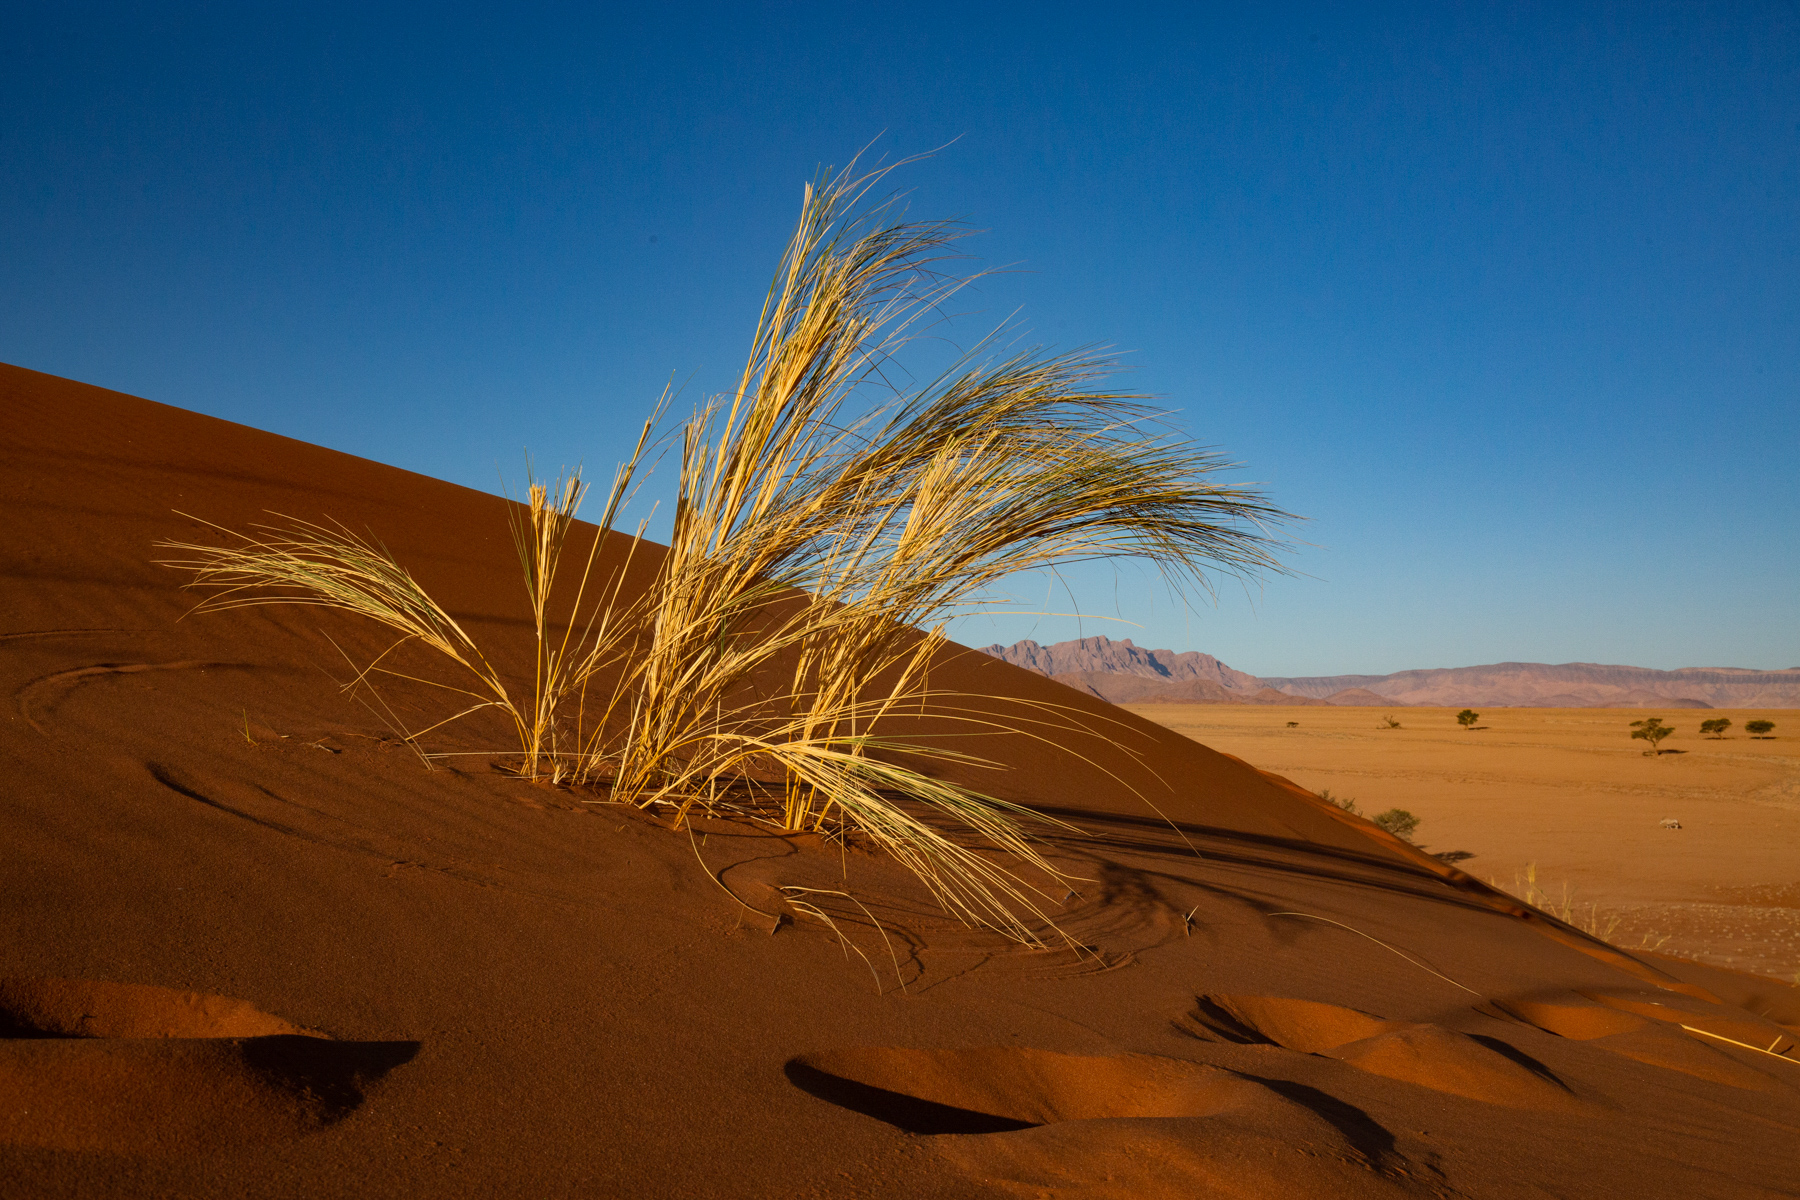 Dune grasses at sunset on Elim Dune in Sossusvlei during our photography tour of Namibia